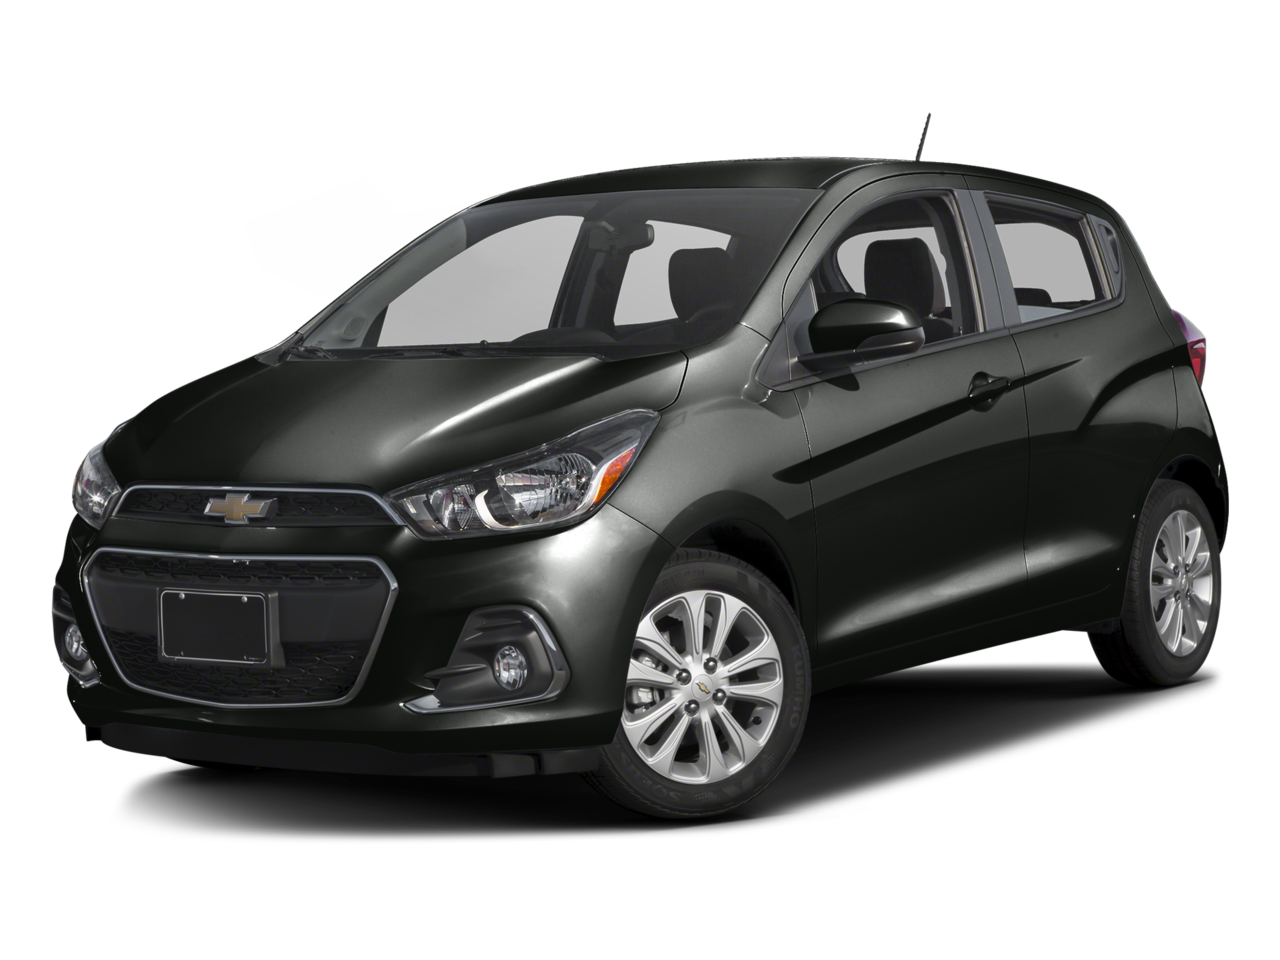 2016 Chevrolet Spark Repair: Service and Maintenance Cost